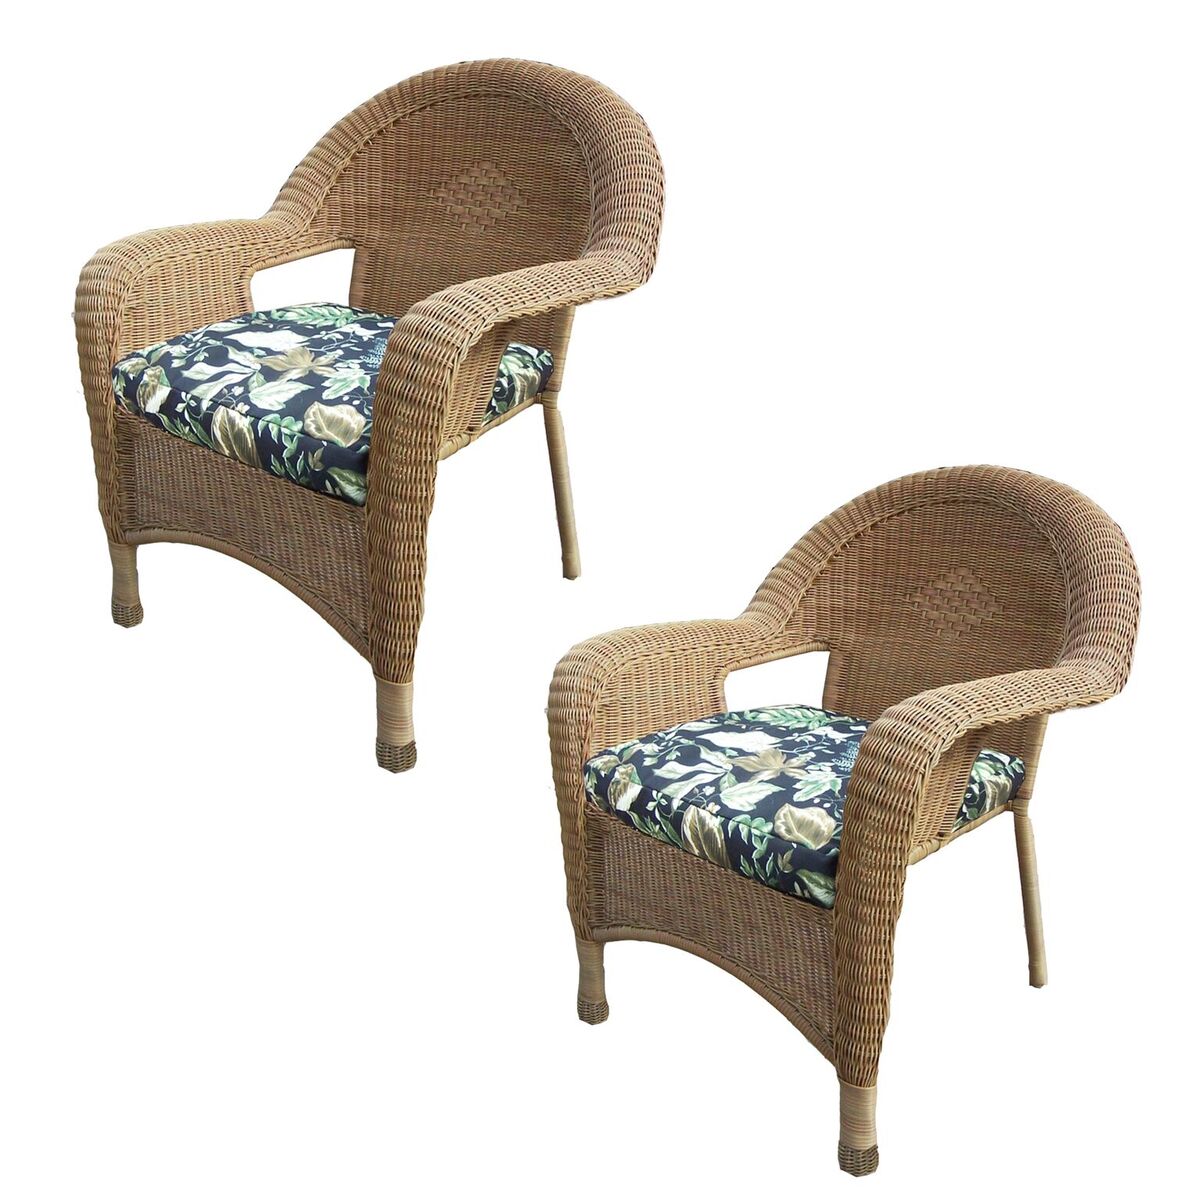 Outdoor Living and Style Pack of 2 Honey Brown Outdoor Patio Resin Wicker Armchairs - Blue Cushions - image 1 of 2